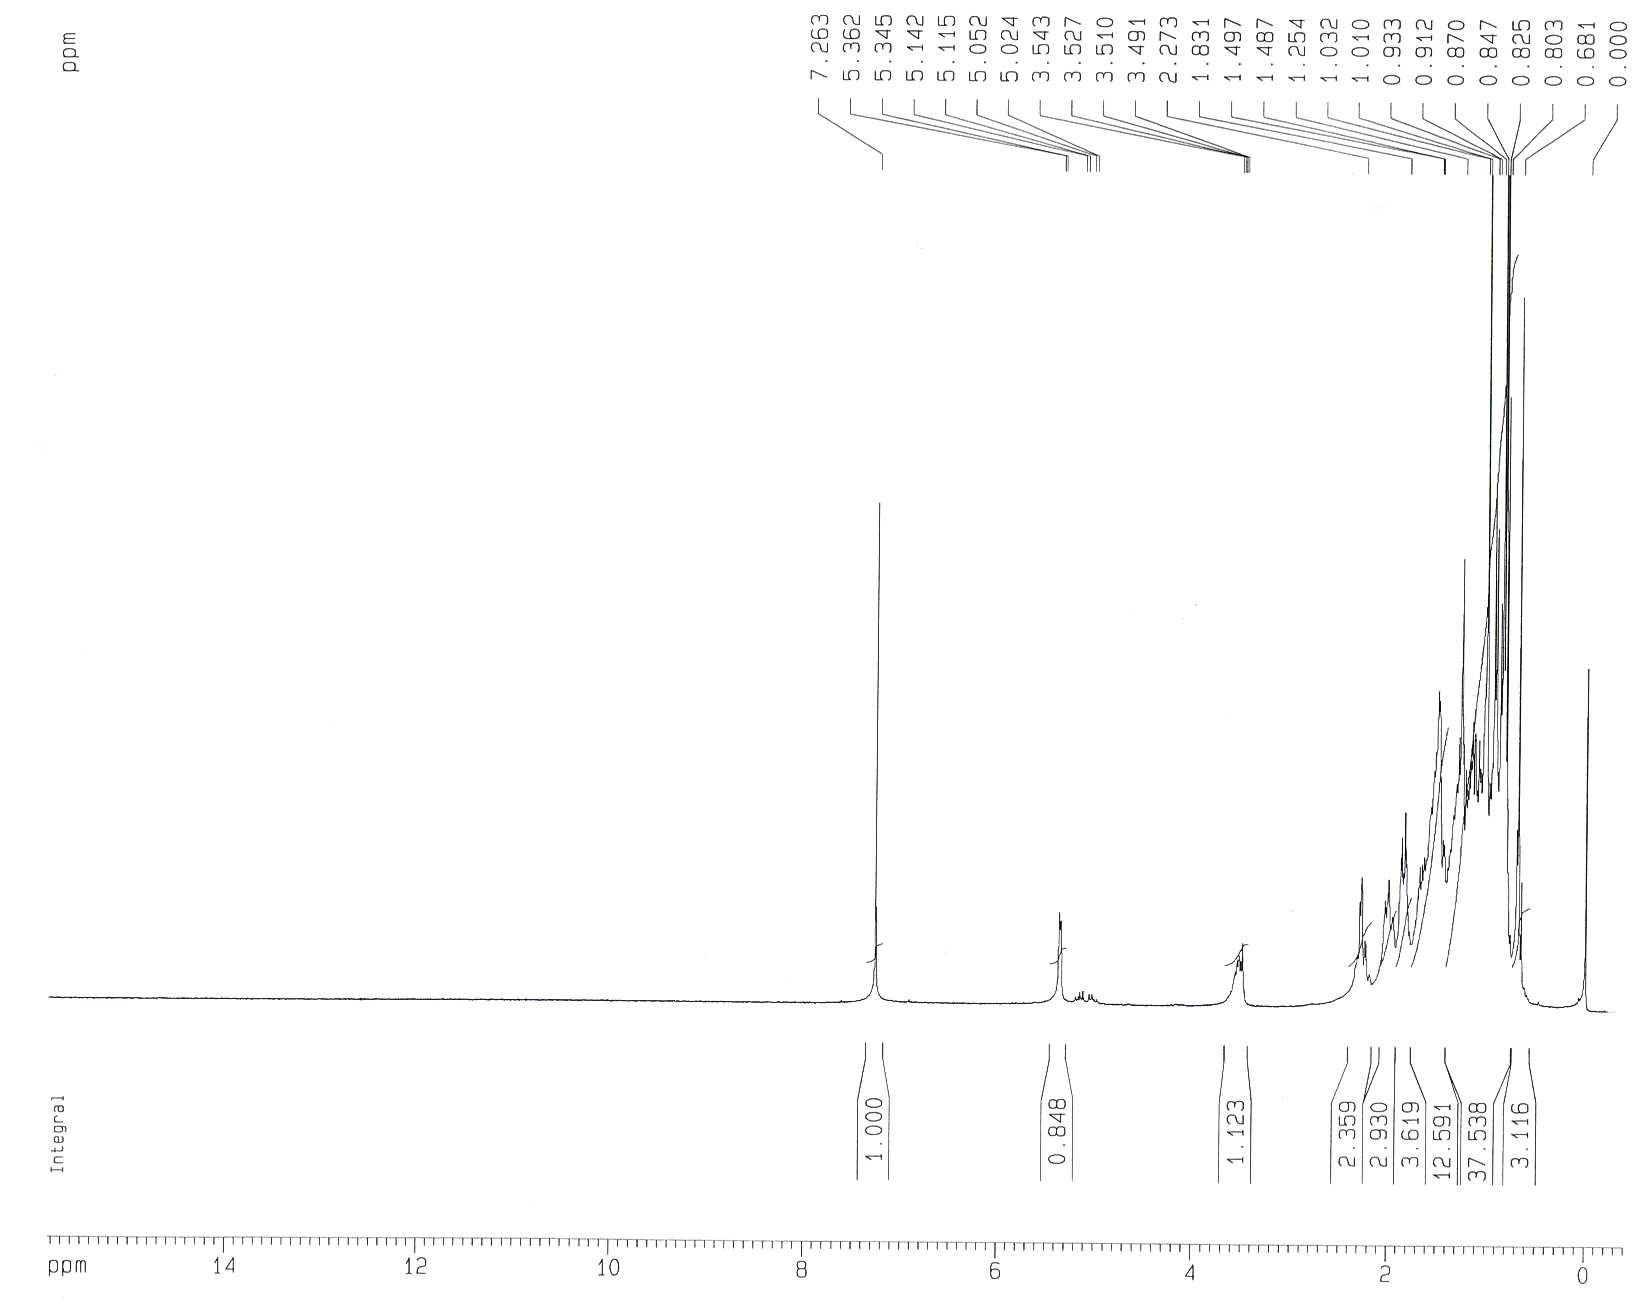 1H-NMR Spectrum of Compound 3(CDCl3, 300 MHz)